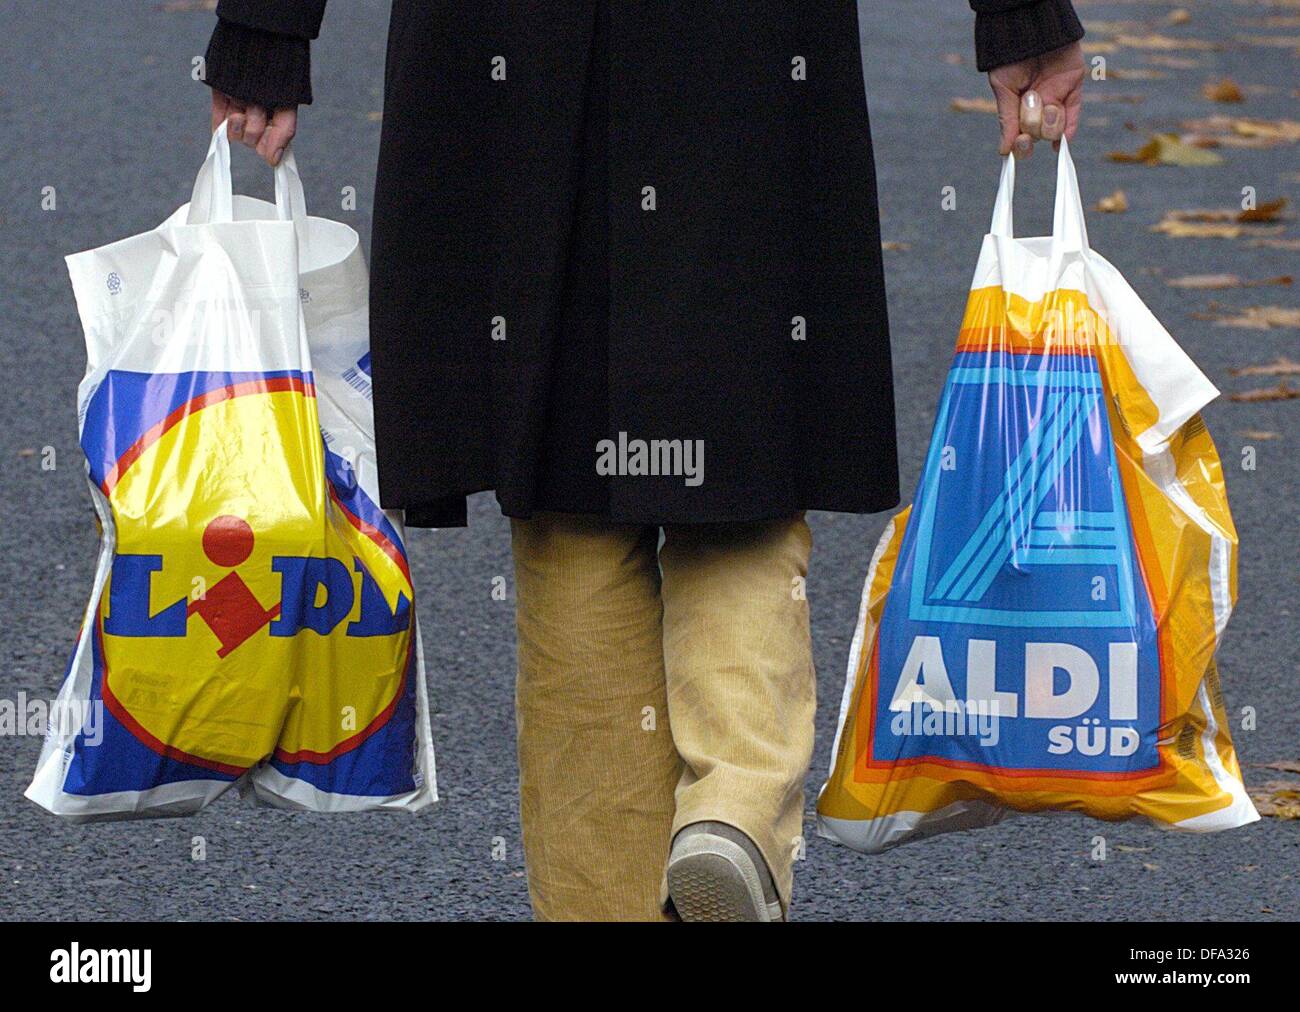 A woman carries one plastic bag of the discounter 'Lidl' and one of 'Aldi' in Cologne on 17 November 2003. Germany's second-biggest discounter Lidl is no longer overshadowed by the industry's number one Aldi. Stock Photo